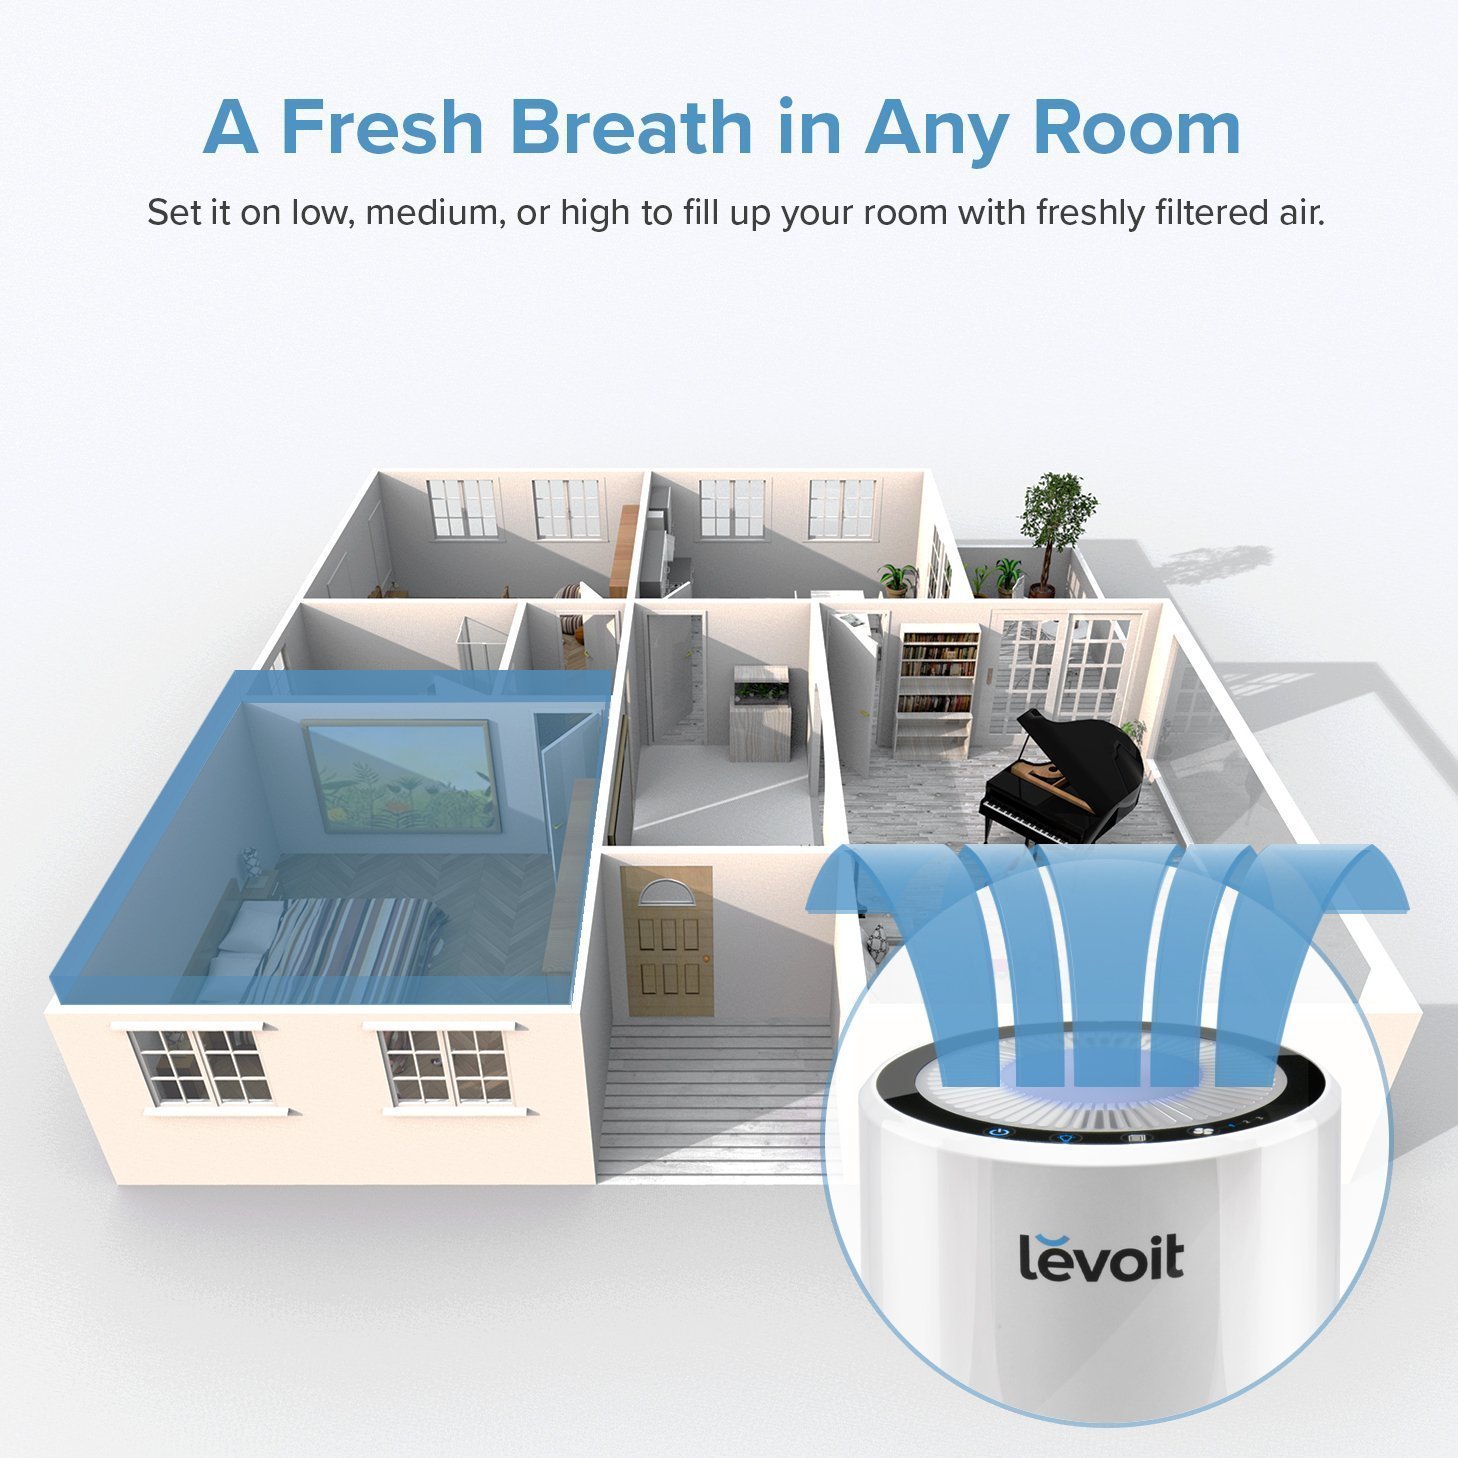 Levoit LV-H132 Air Purifier with True Hepa Filter for Smoke, Bacteria, and More - image 2 of 9